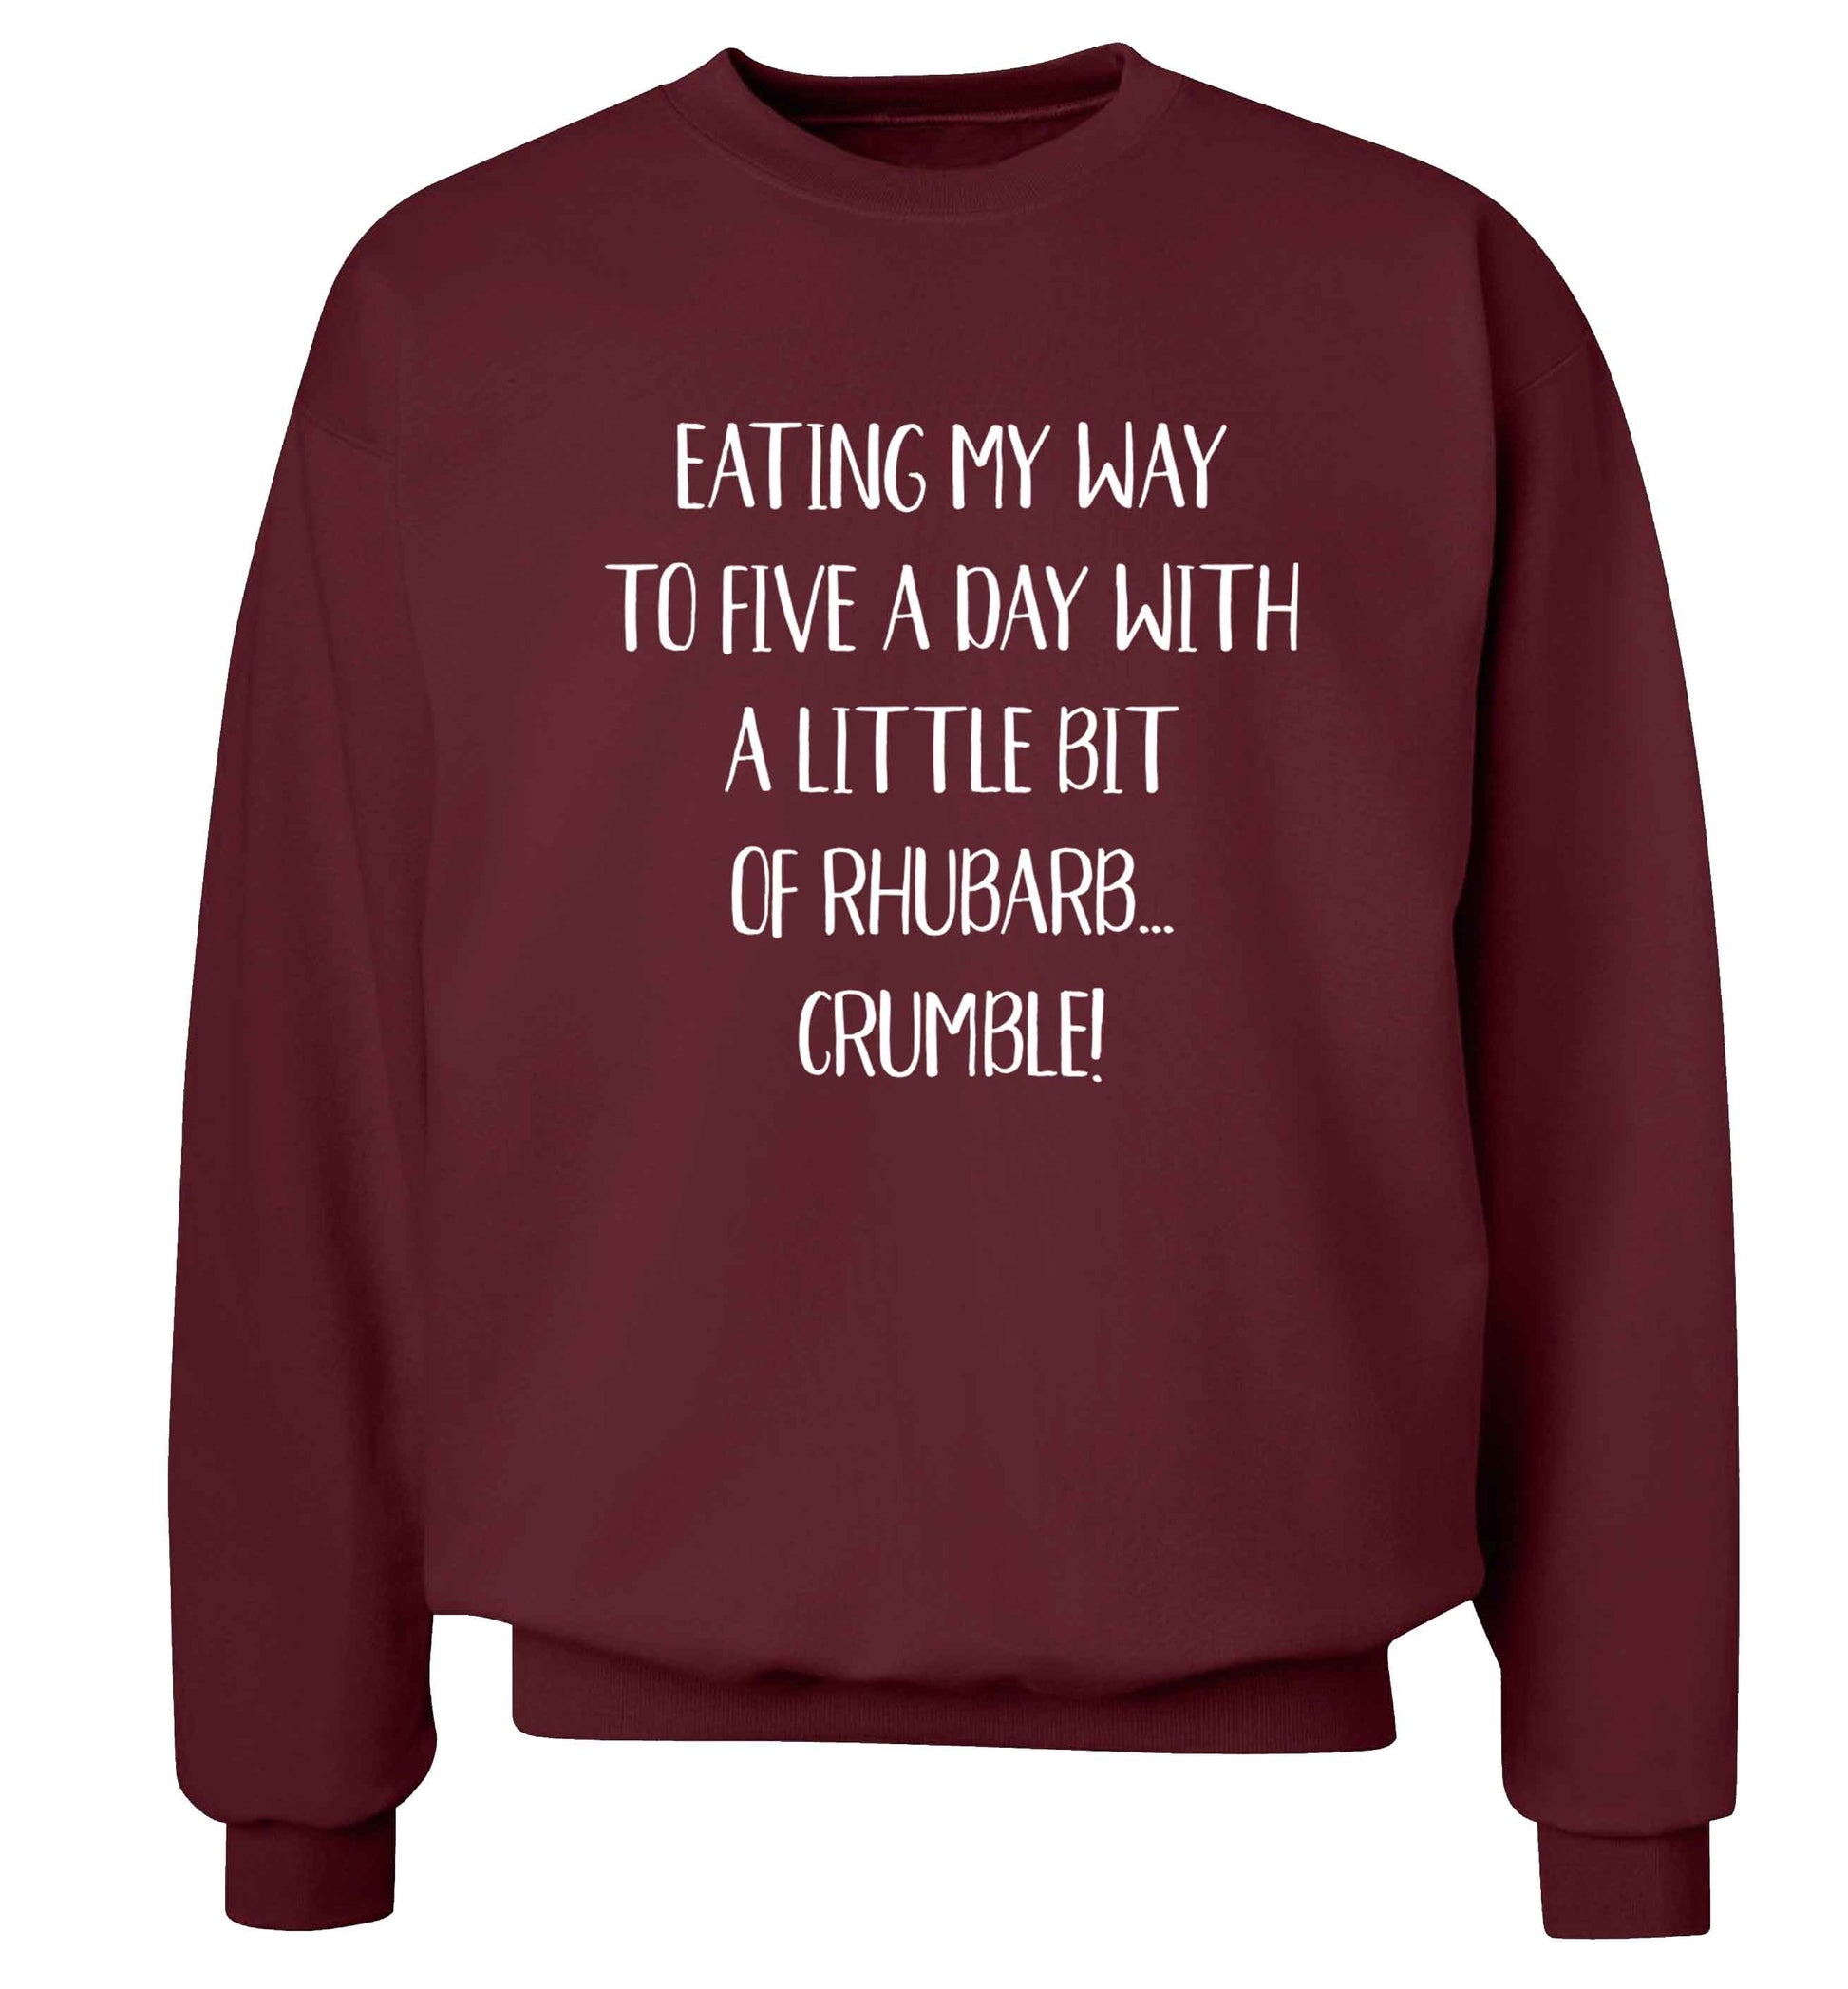 Eating my way to five a day with a little bit of rhubarb crumble Adult's unisex maroon Sweater 2XL